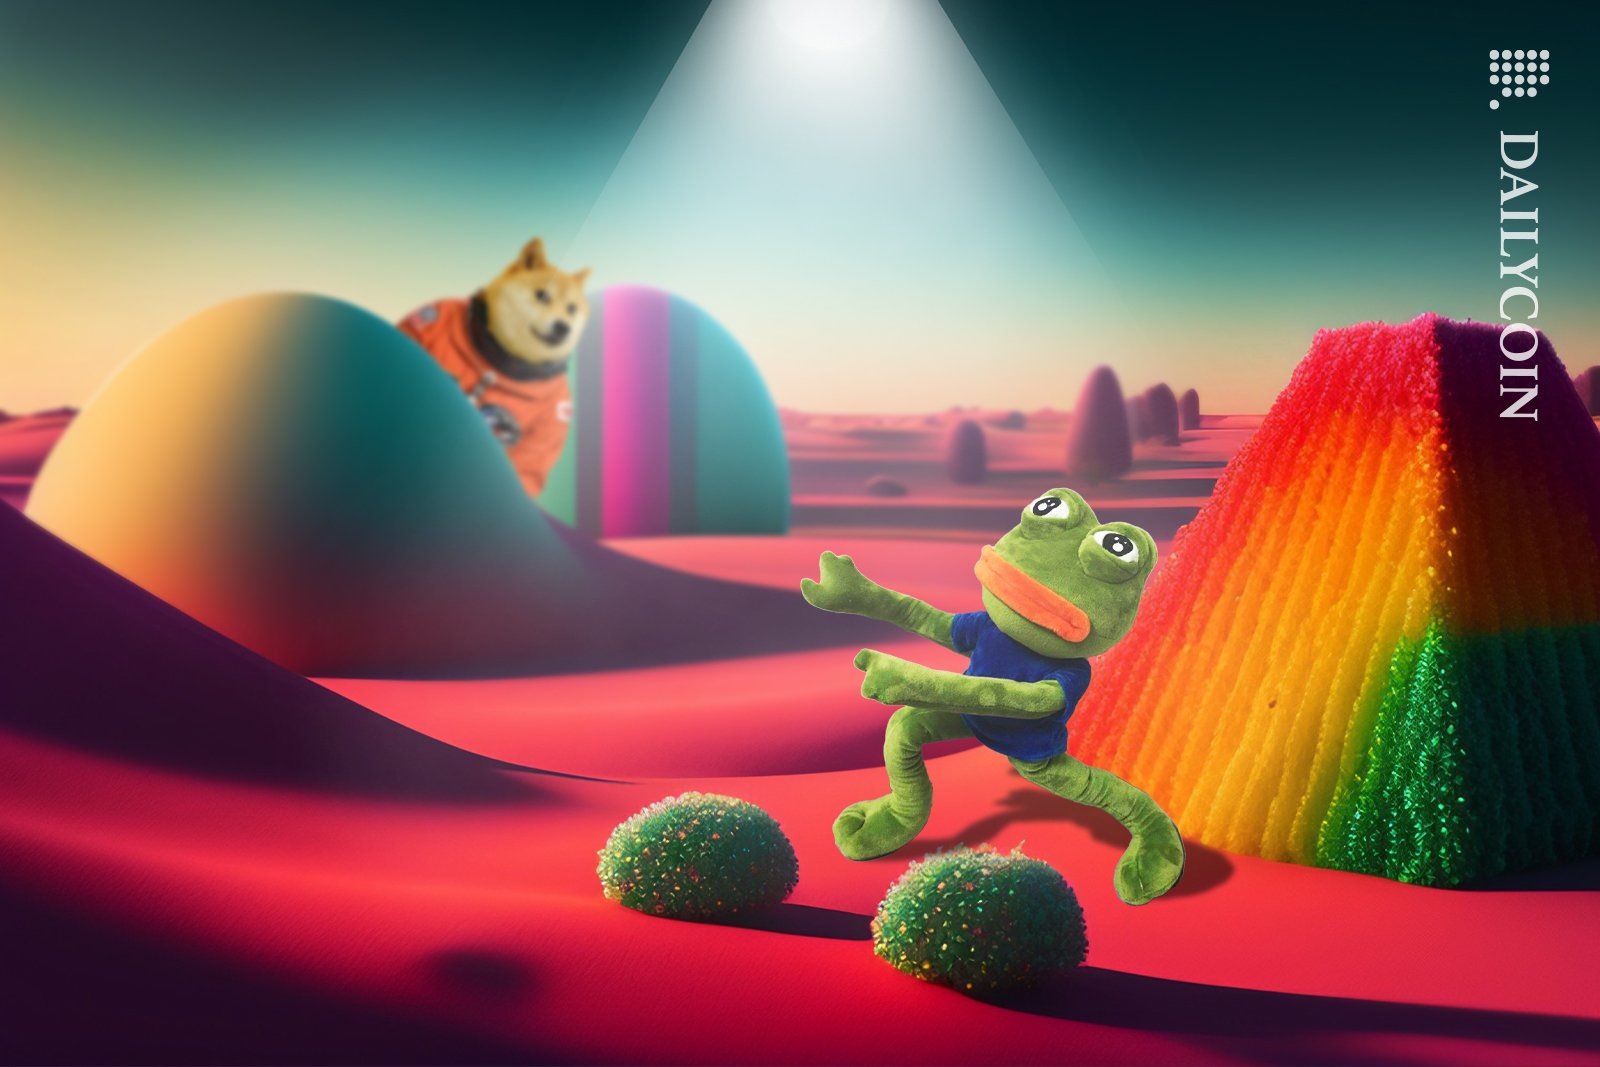 PEPE in candy land looking up to the light, Doge in a spacesuit behind a hill watching him.